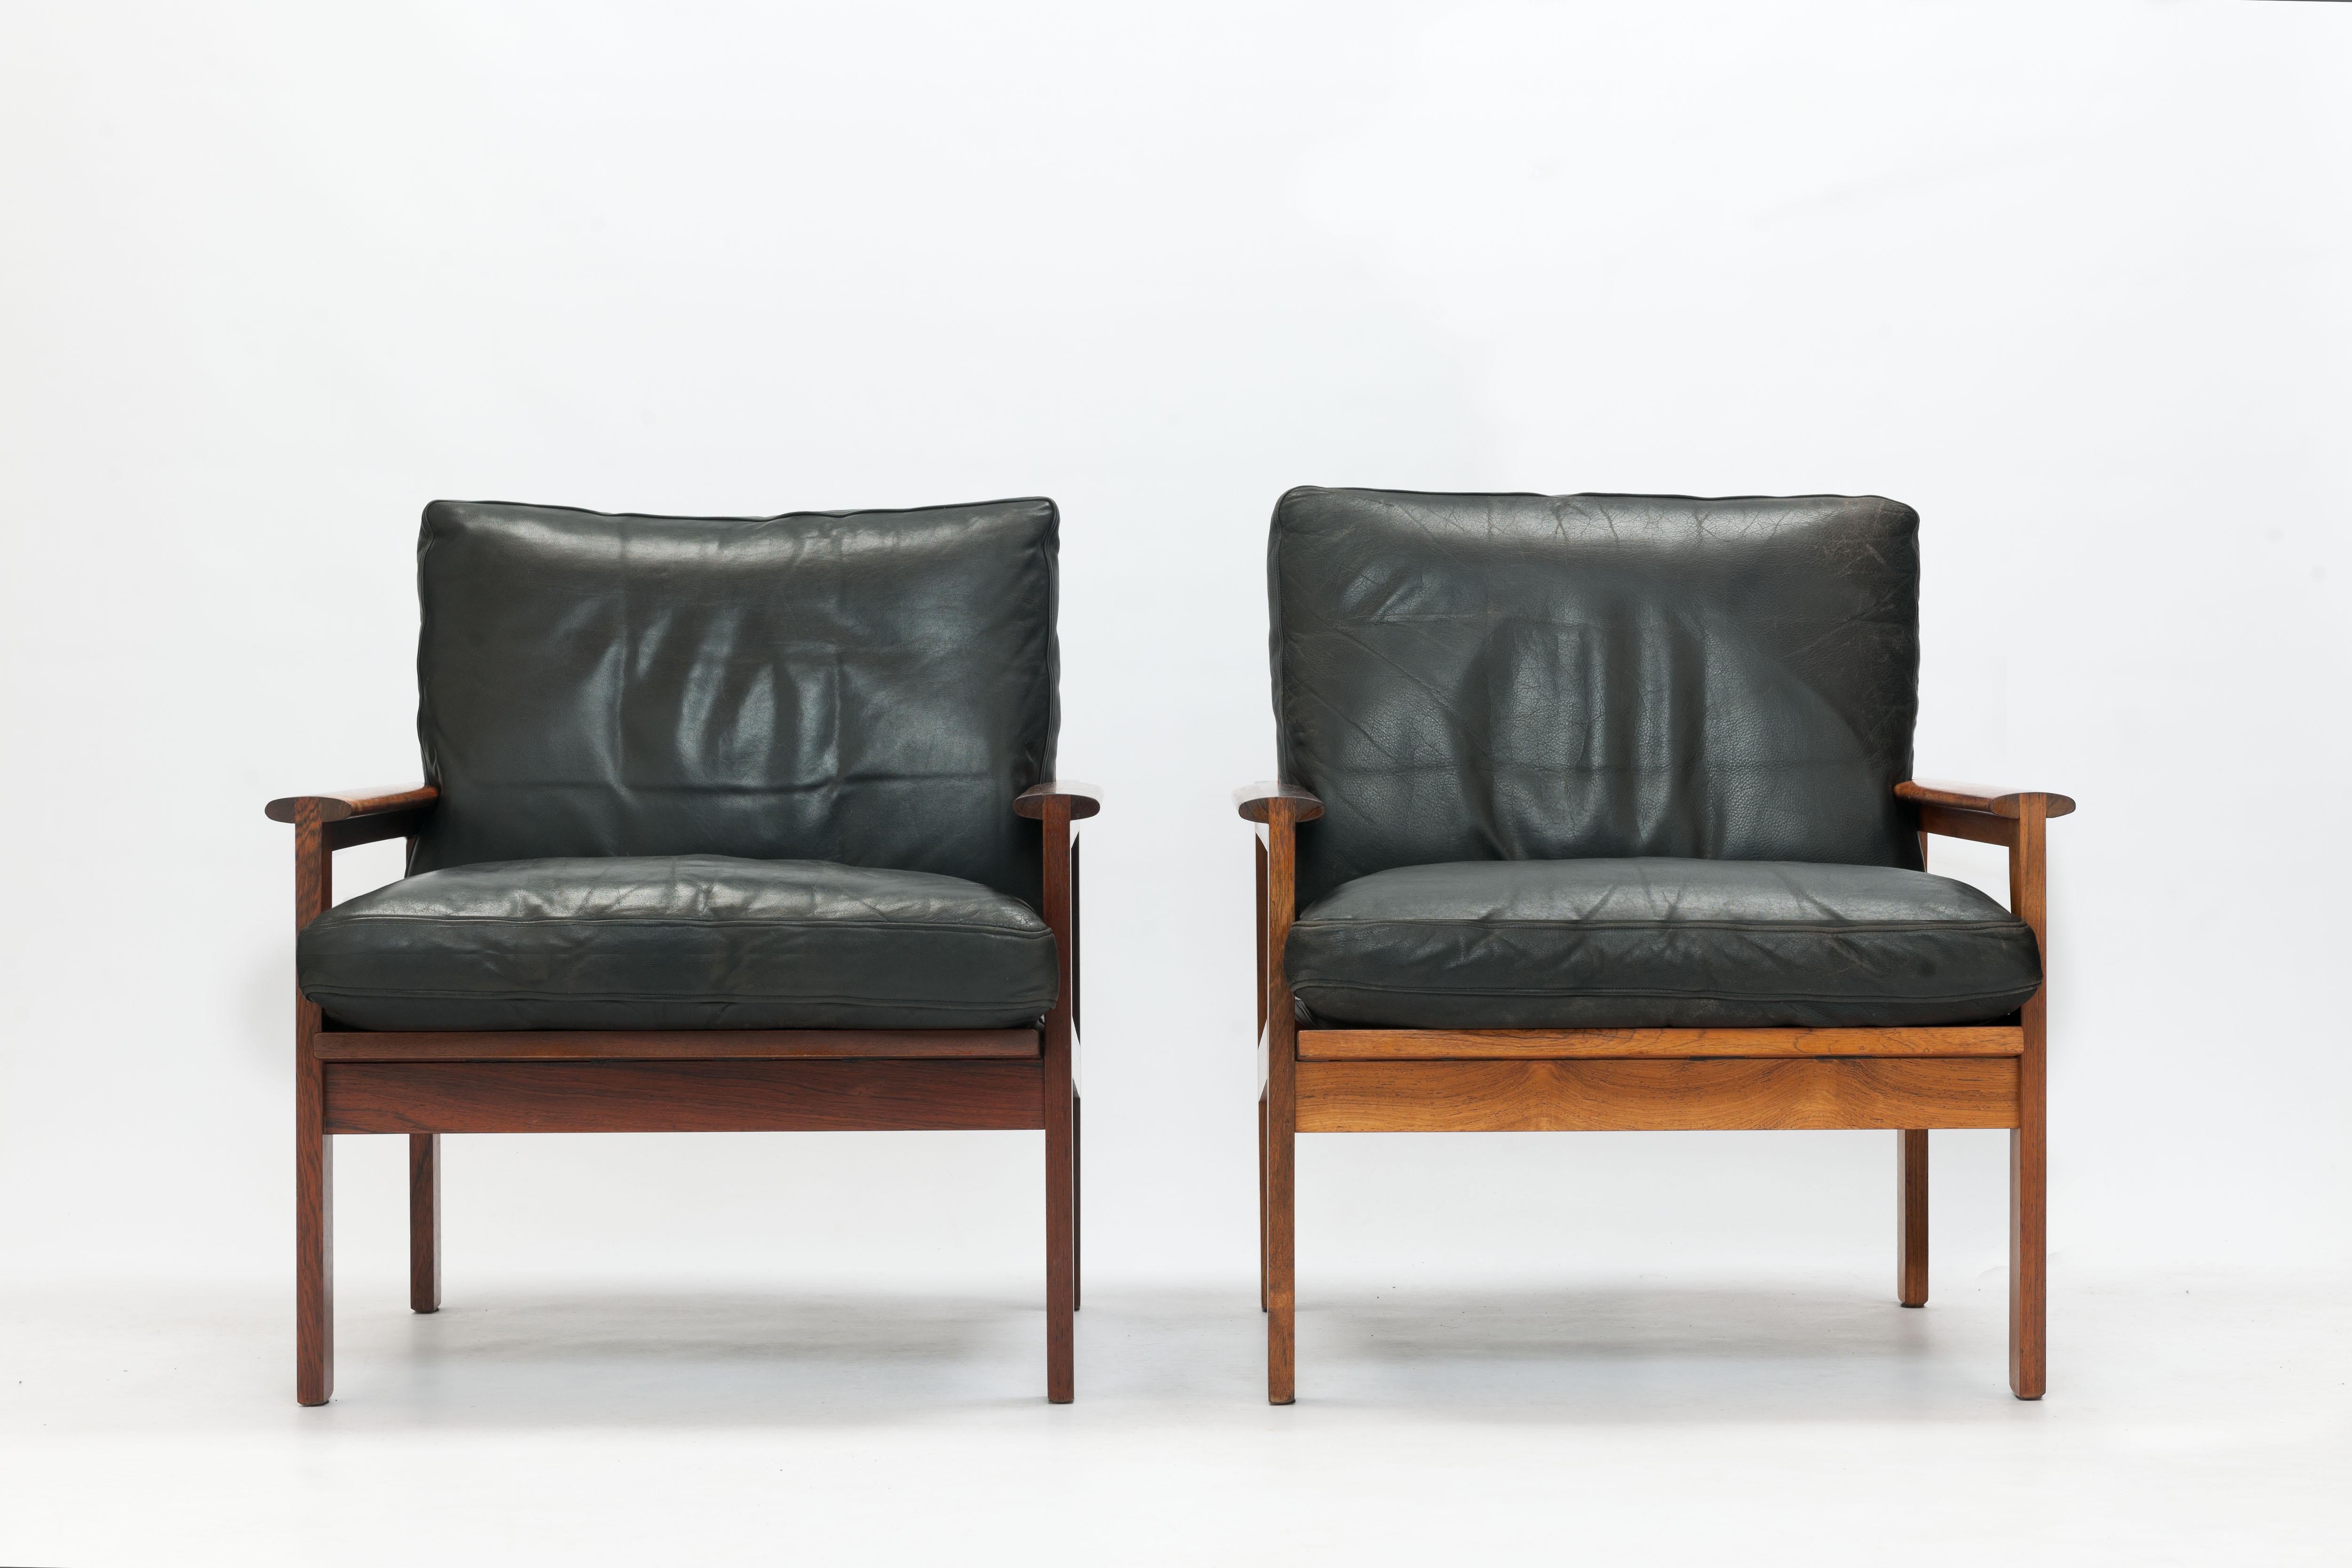 Rosewood & Black Leather Capella Arm Chair by Illum Wikkelsø, Pair Available 7